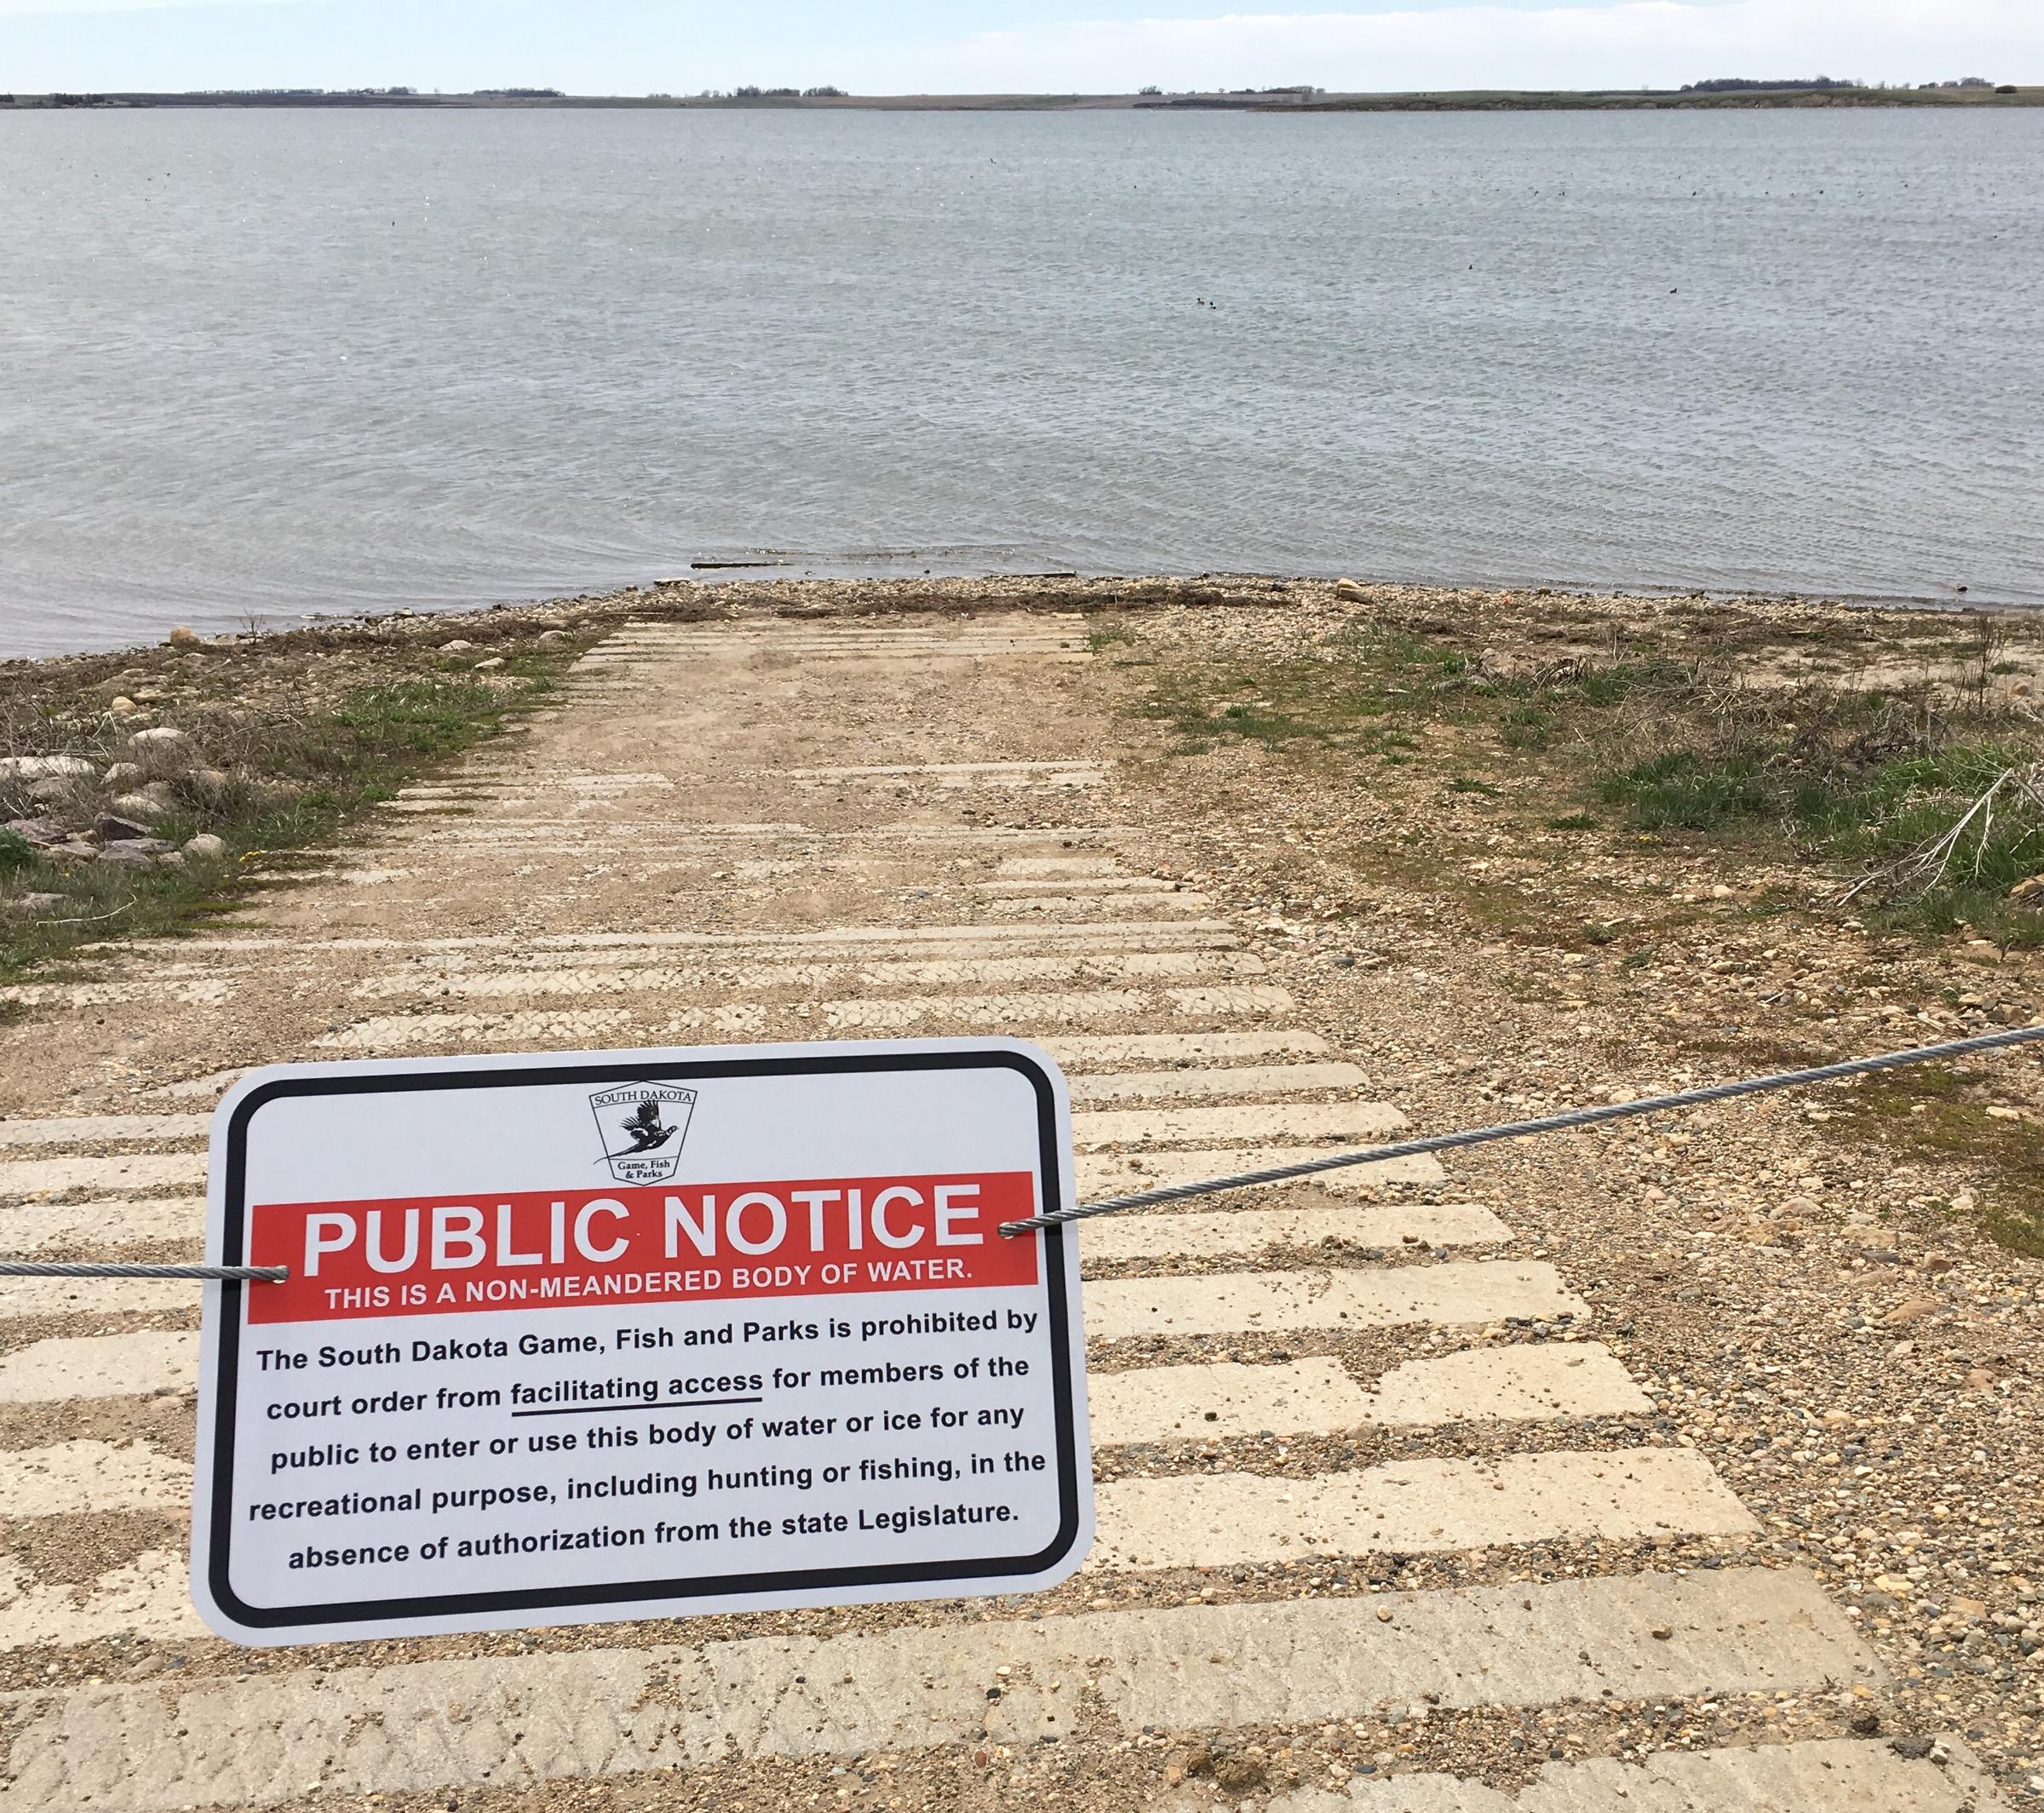 Senate Narrowly Refuses Recreationists Bill For Non-Meandered Waters ...